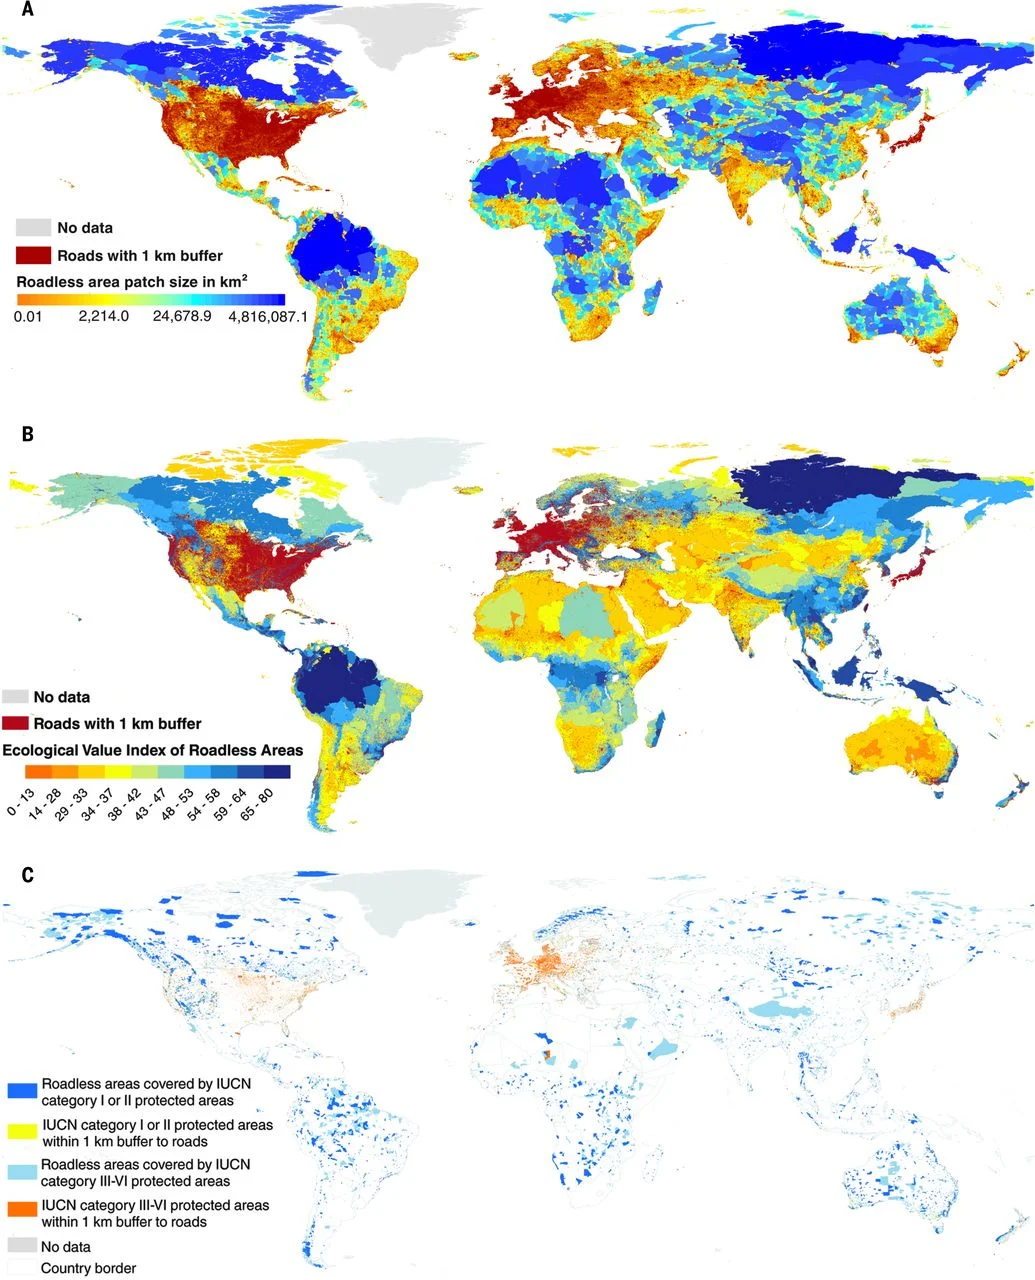 Roadless areas in the world